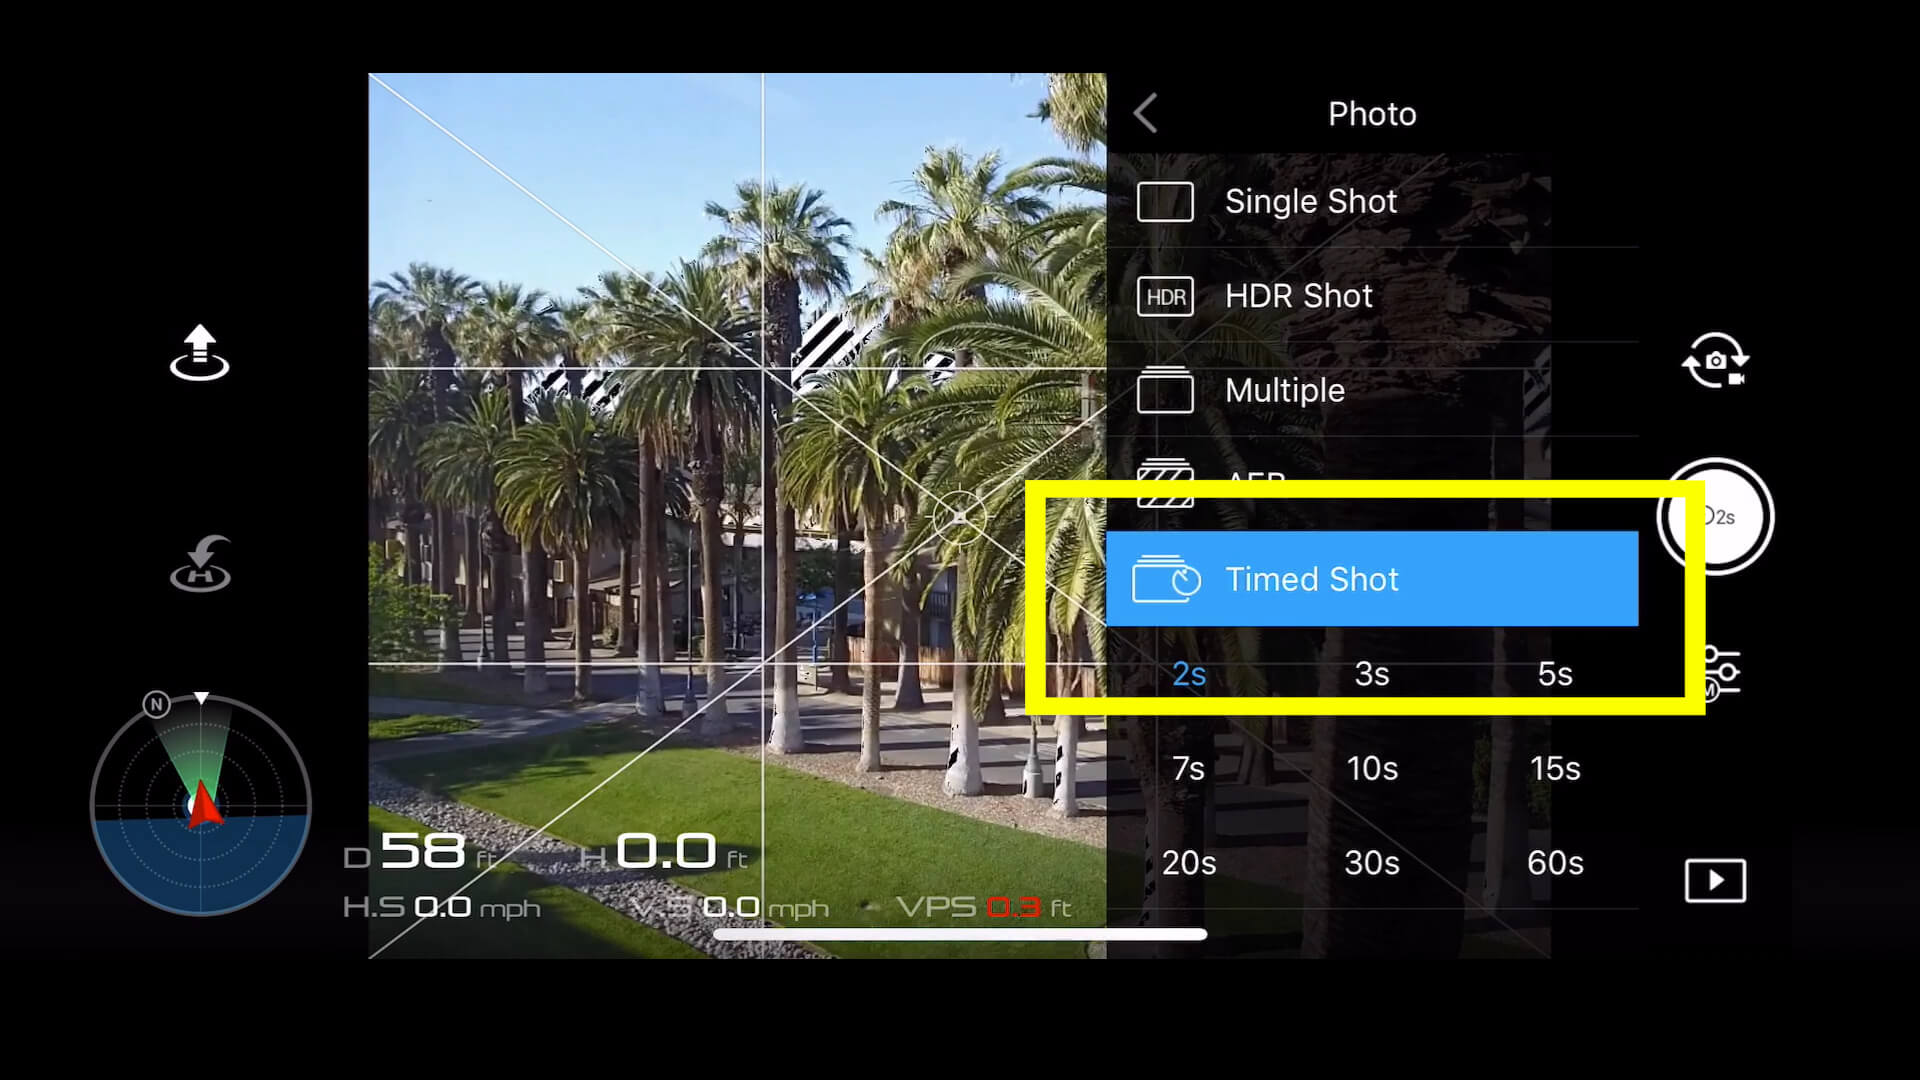 20 basic camera settings for dji drone photos - timed